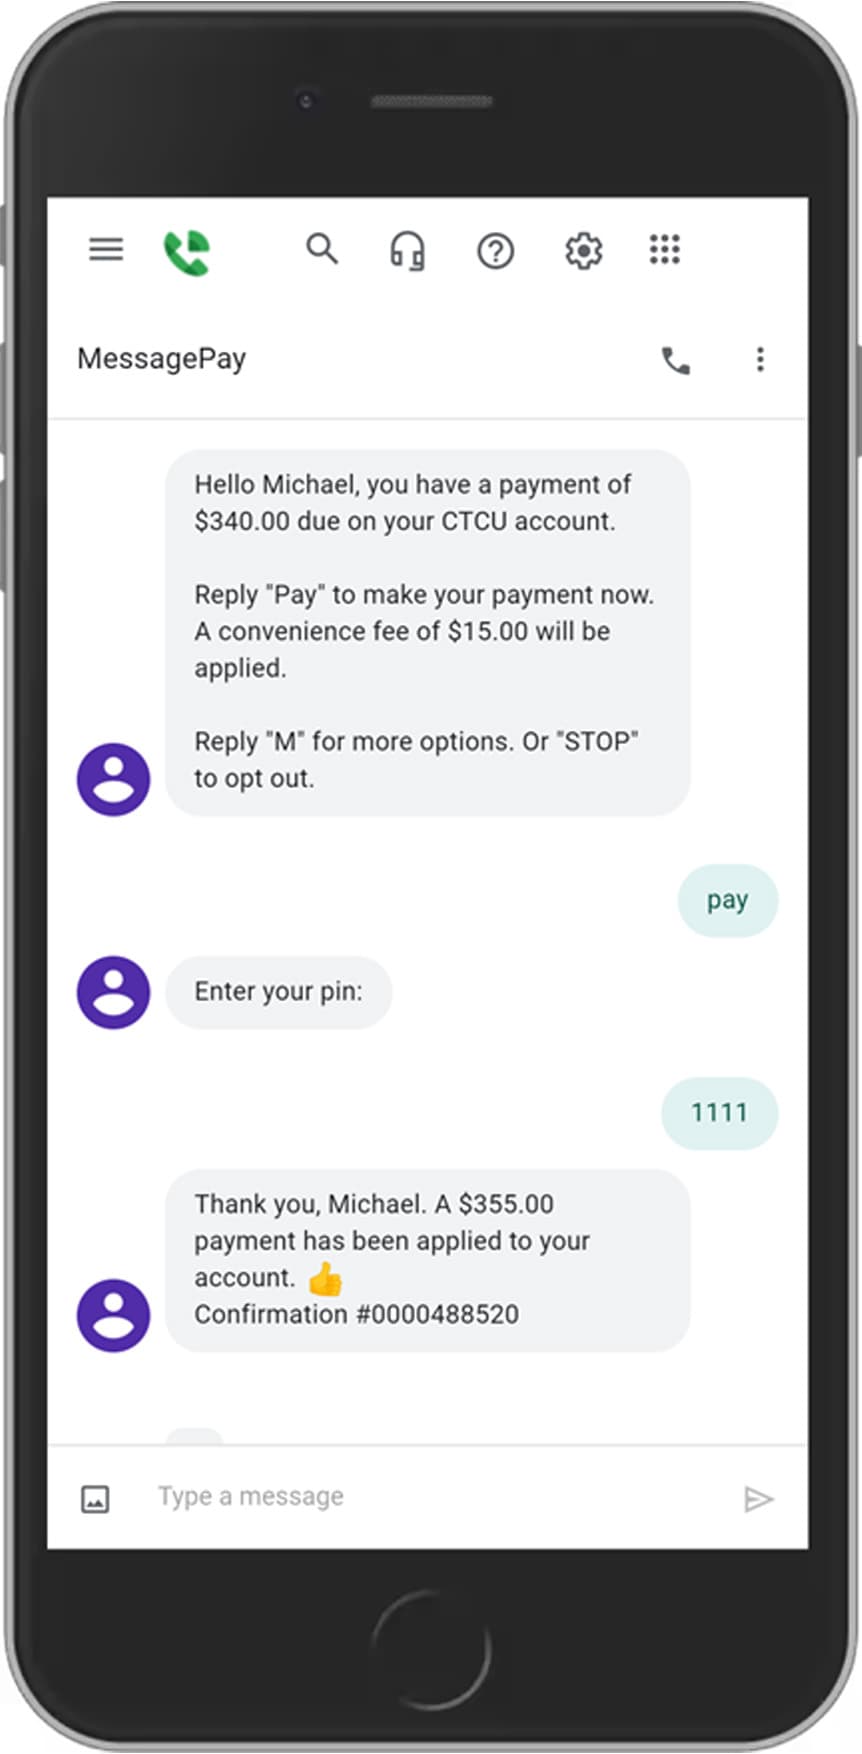 Making a Loan Payment is now easier than ever with CTCU, Payment VIA text example